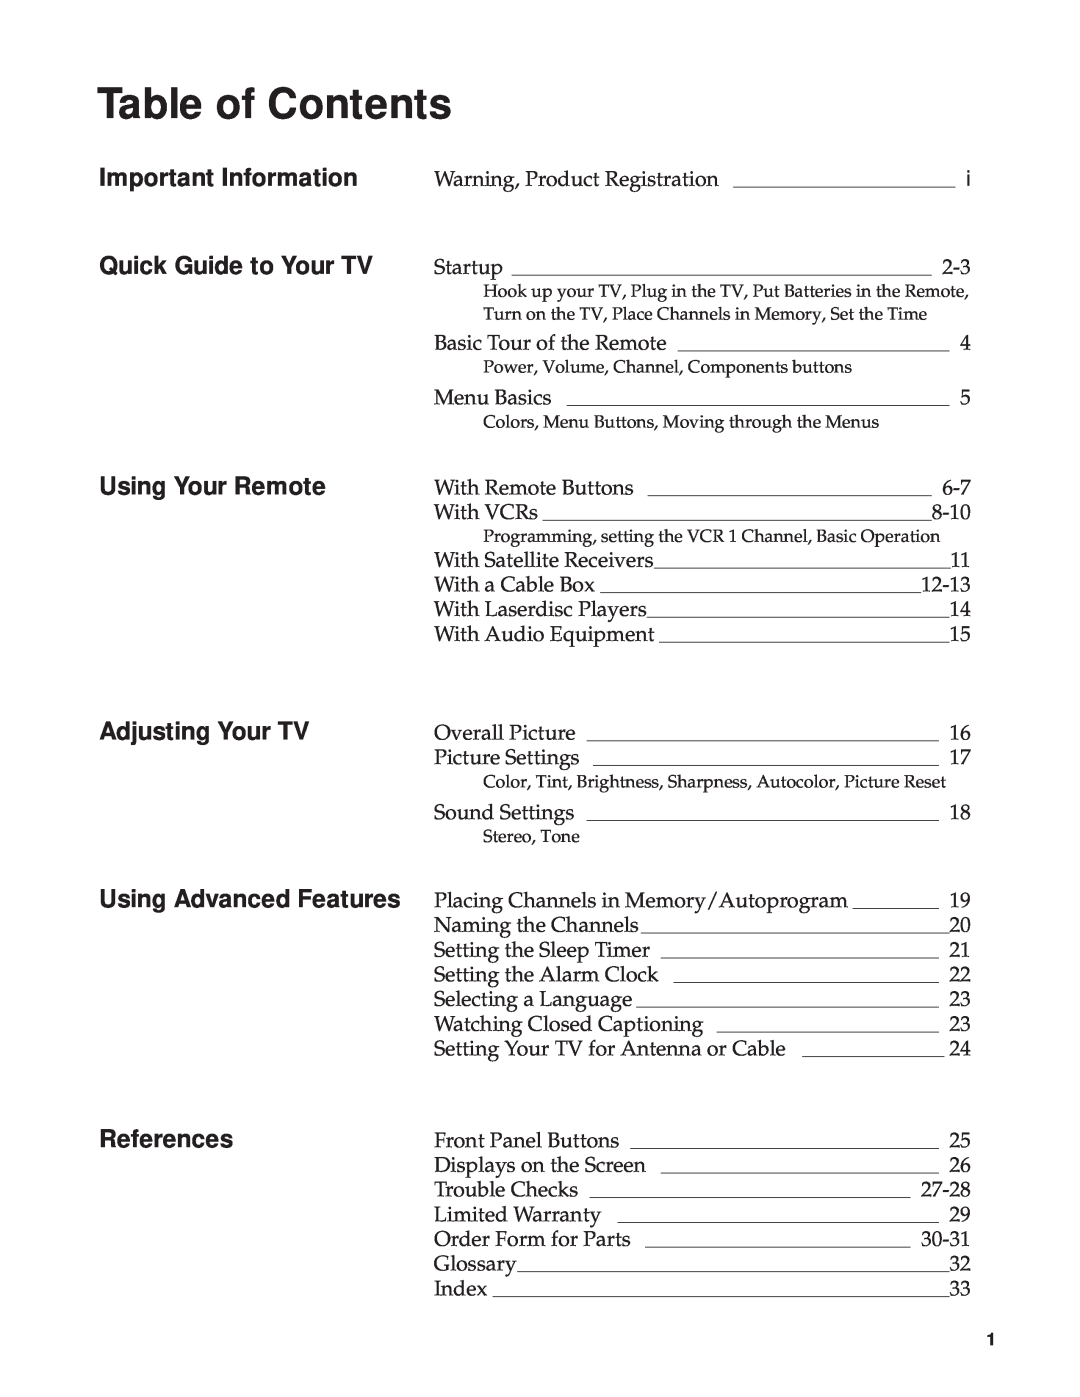 RCA Color TV Table of Contents, Important Information Quick Guide to Your TV, References, Overall Picture, Sound Settings 